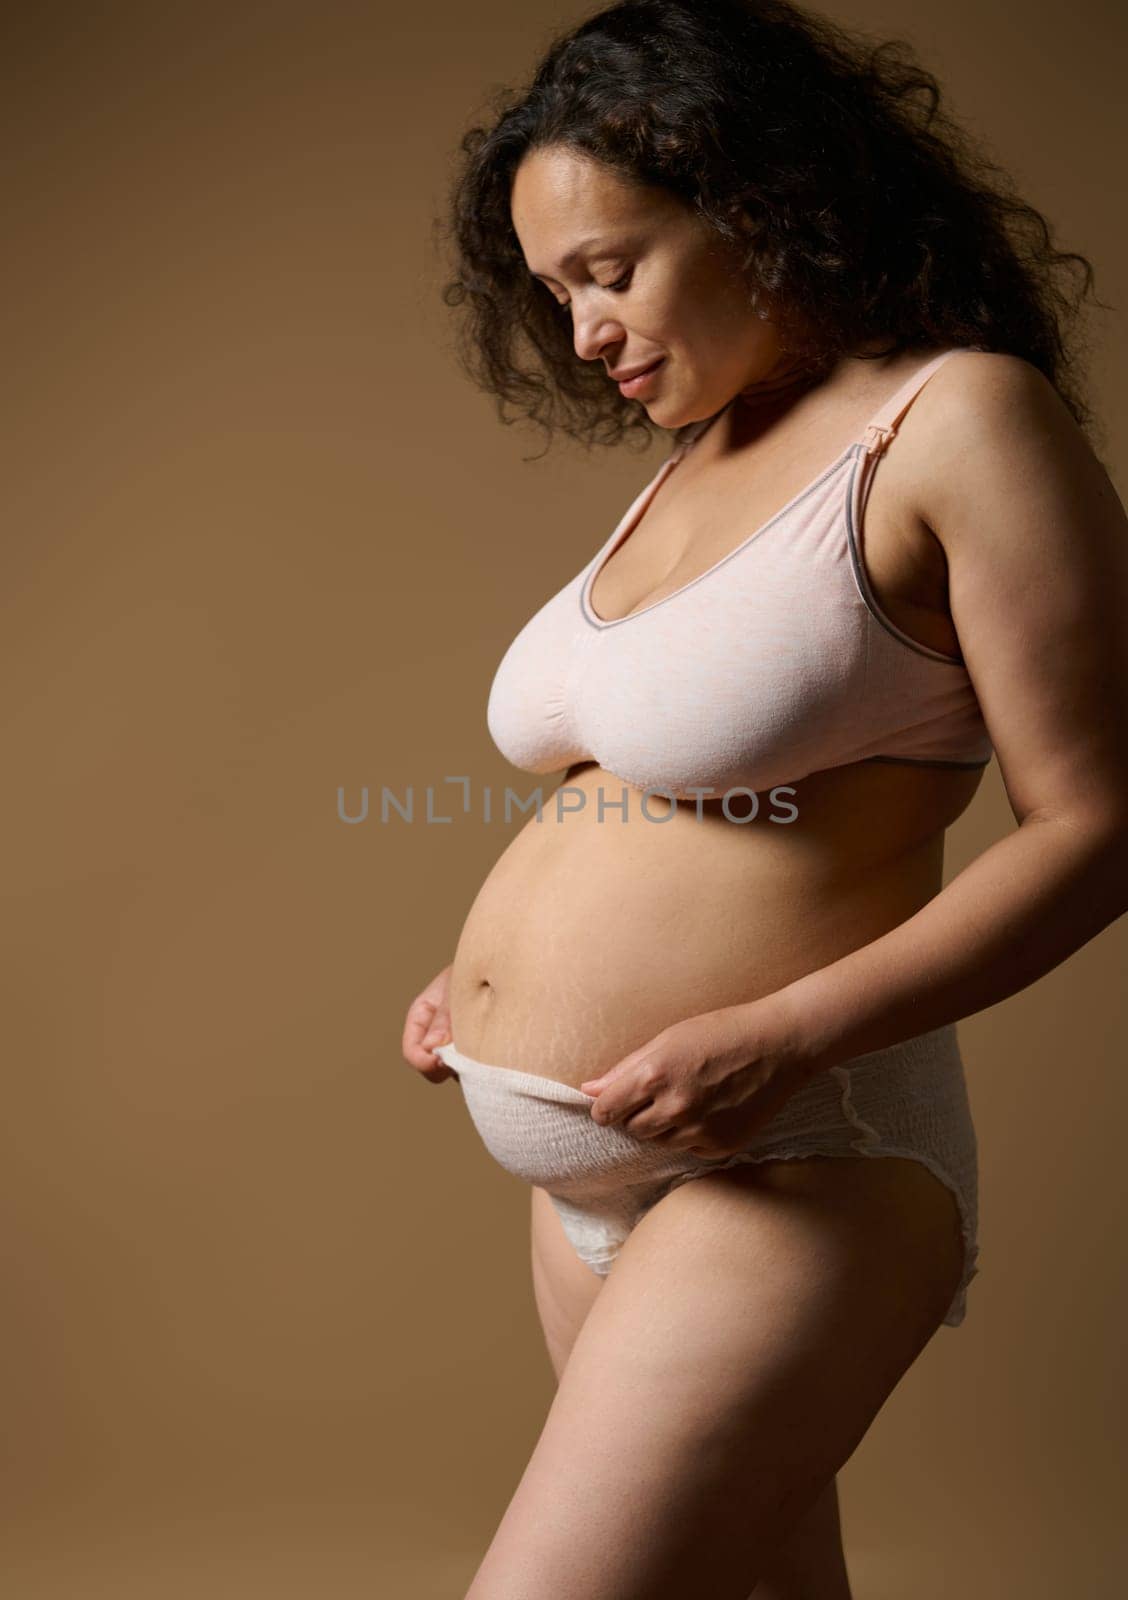 Authentic woman mother in lingerie, posing with postnatal naked belly with flaws stretch marks few days after childbirth by artgf